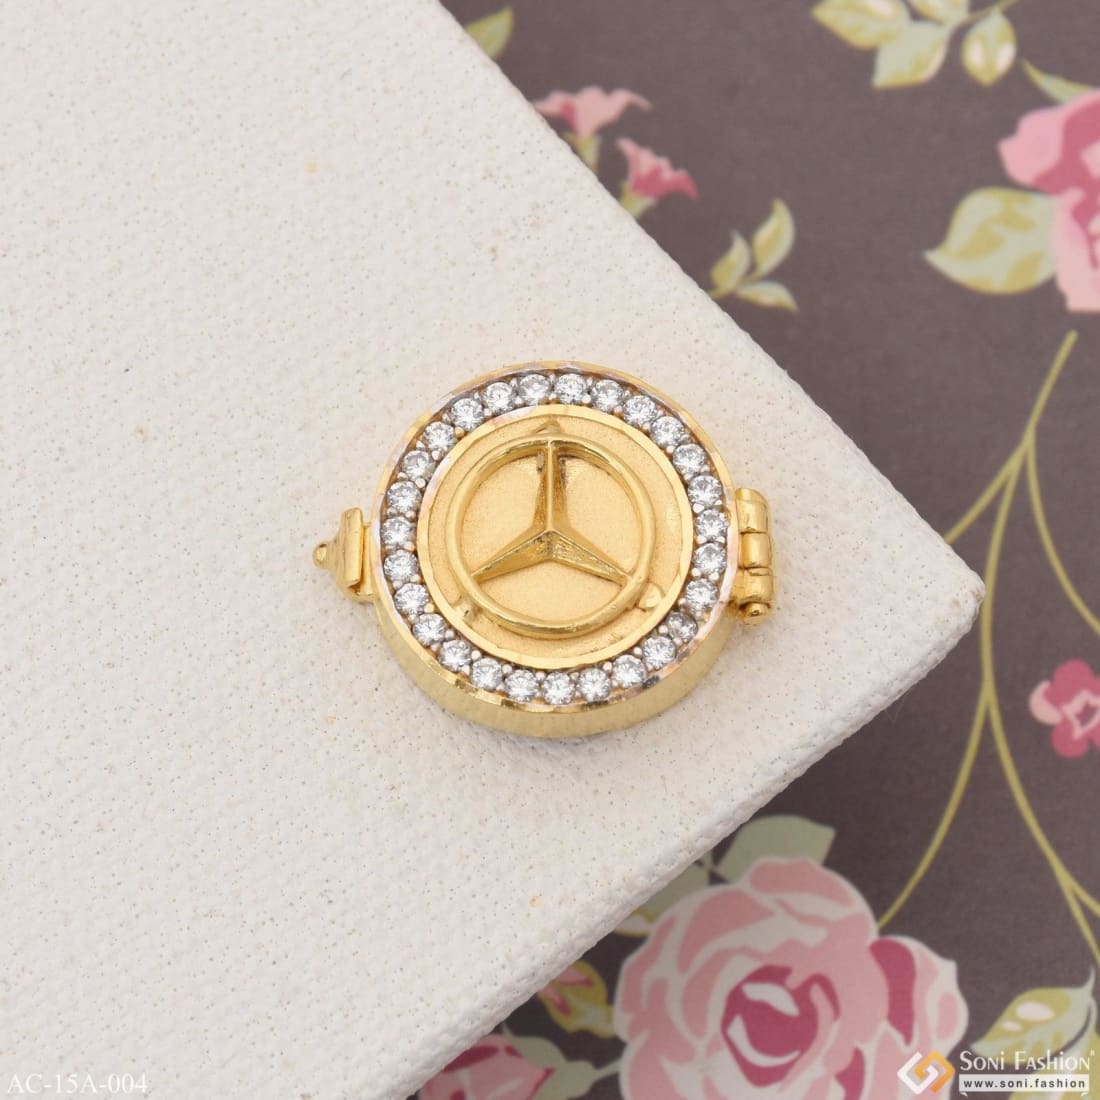 Buy quality 22 kt gold cz mercedes logo ring in Ahmedabad